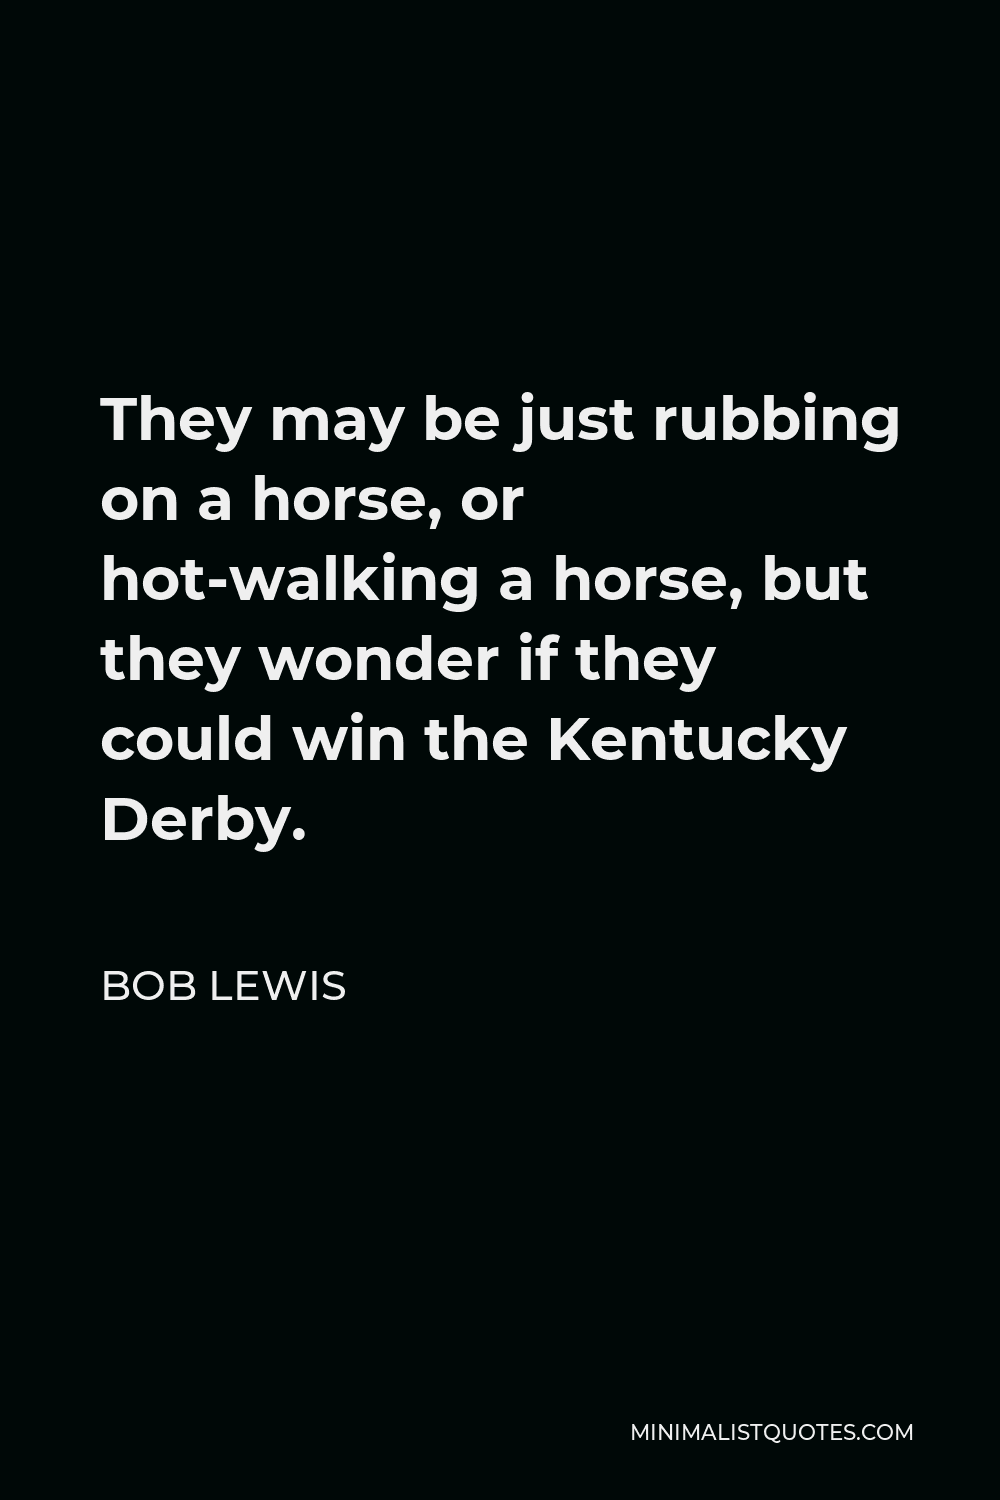 Bob Lewis Quote - They may be just rubbing on a horse, or hot-walking a horse, but they wonder if they could win the Kentucky Derby.